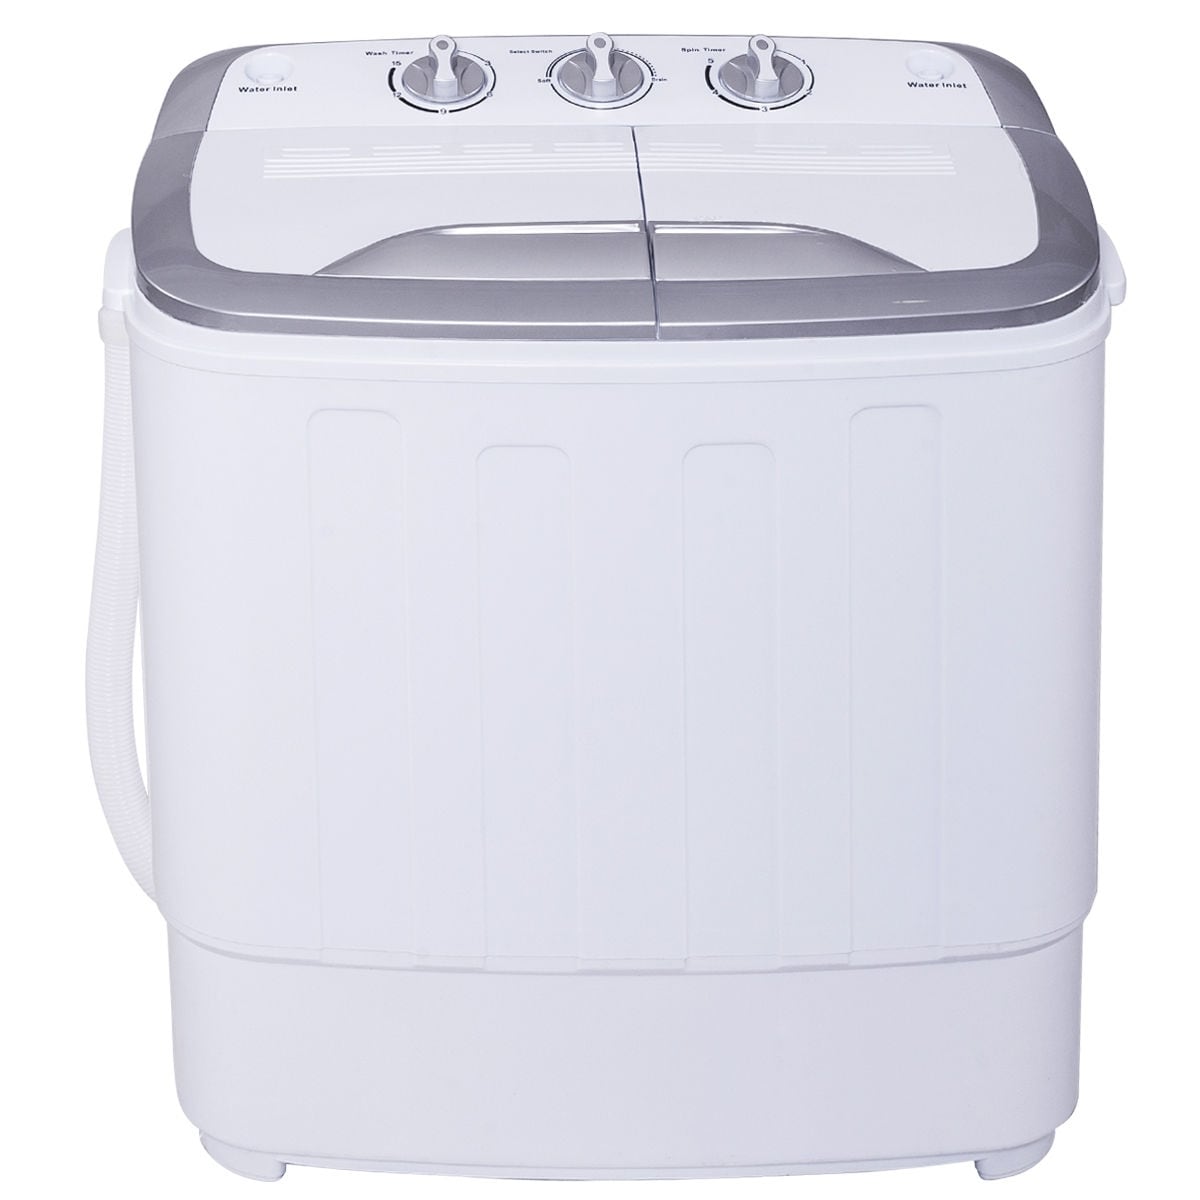 ZENY Portable Clothes Washing Machine Mini Twin Tub Washing Machine 13lbs  Capacity with Spin Dryer,Compact Washer and Dryer Combo Lightweight Small